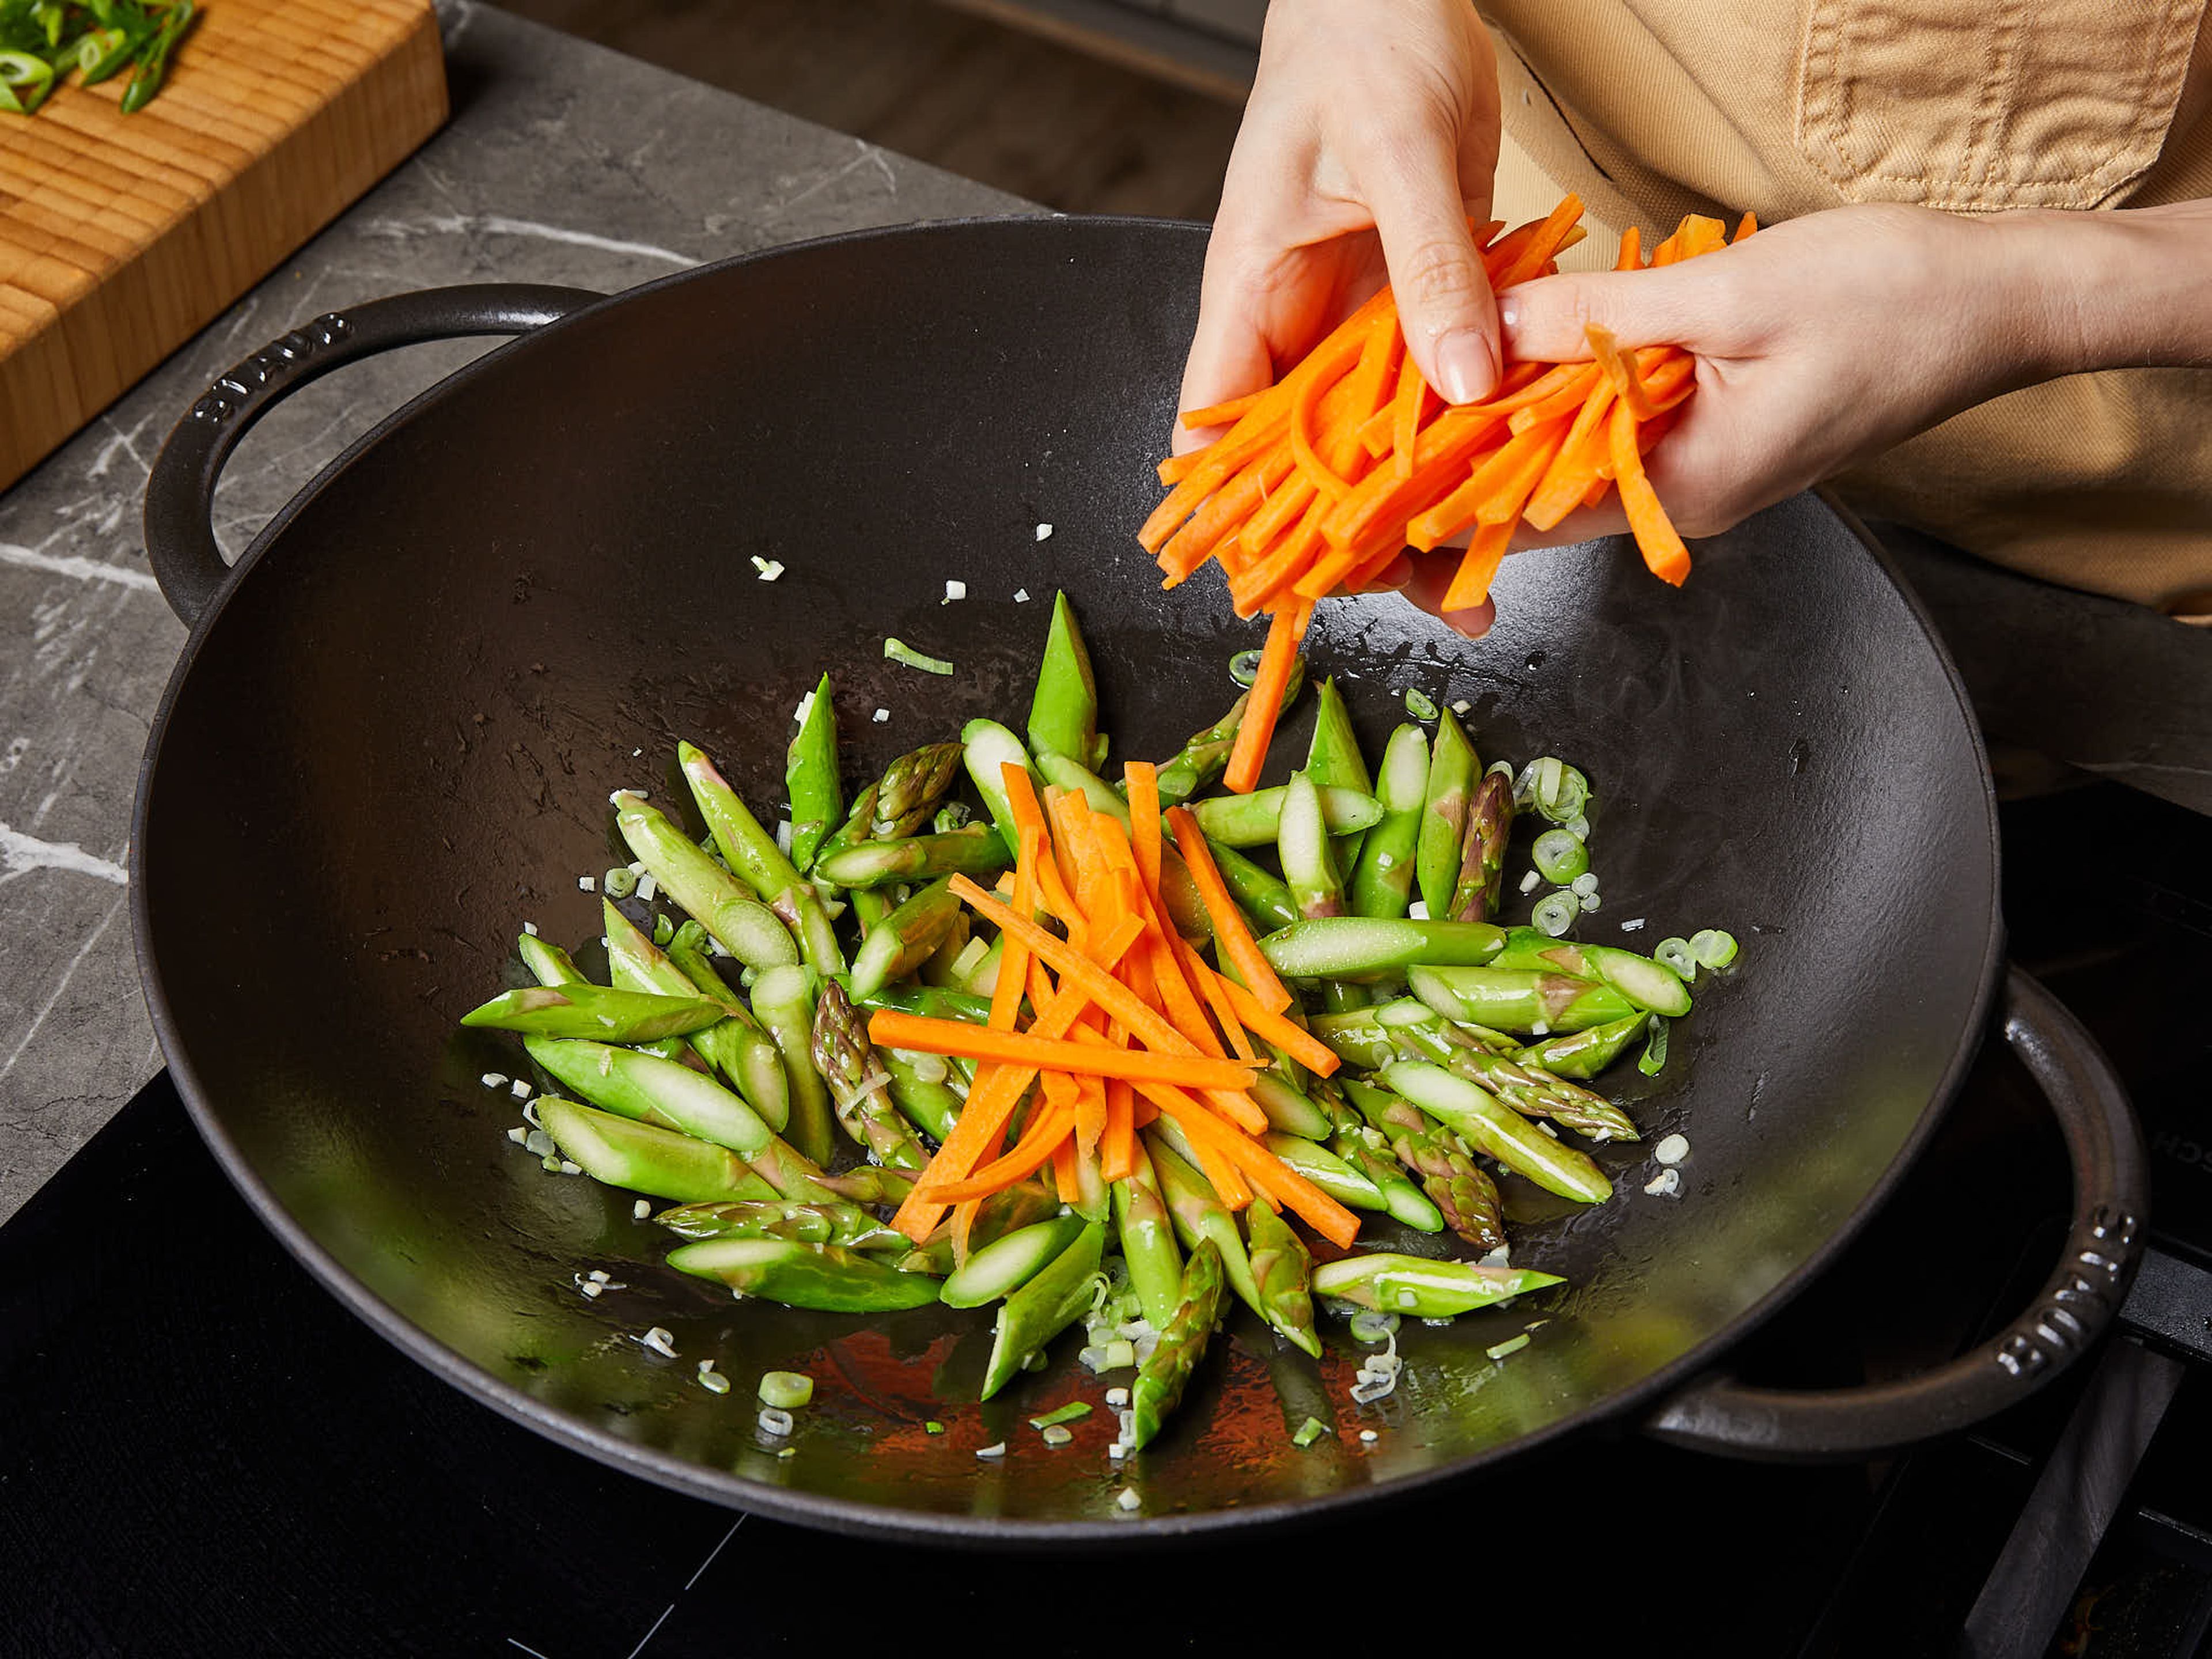 In a heatproof bowl, cover the udons with boiling water. Let them soak for approx. 2 min. until they are loosened. Then drain and set aside or prepare according to package instructions. Heat oil in a large frying pan or wok over medium heat. Add garlic, white part of scallions, and asparagus. Stir-fry for approx. 3 min. over medium heat with chopsticks or a spoon. Then add carrots and continue stir-frying for approx. 3 more min.